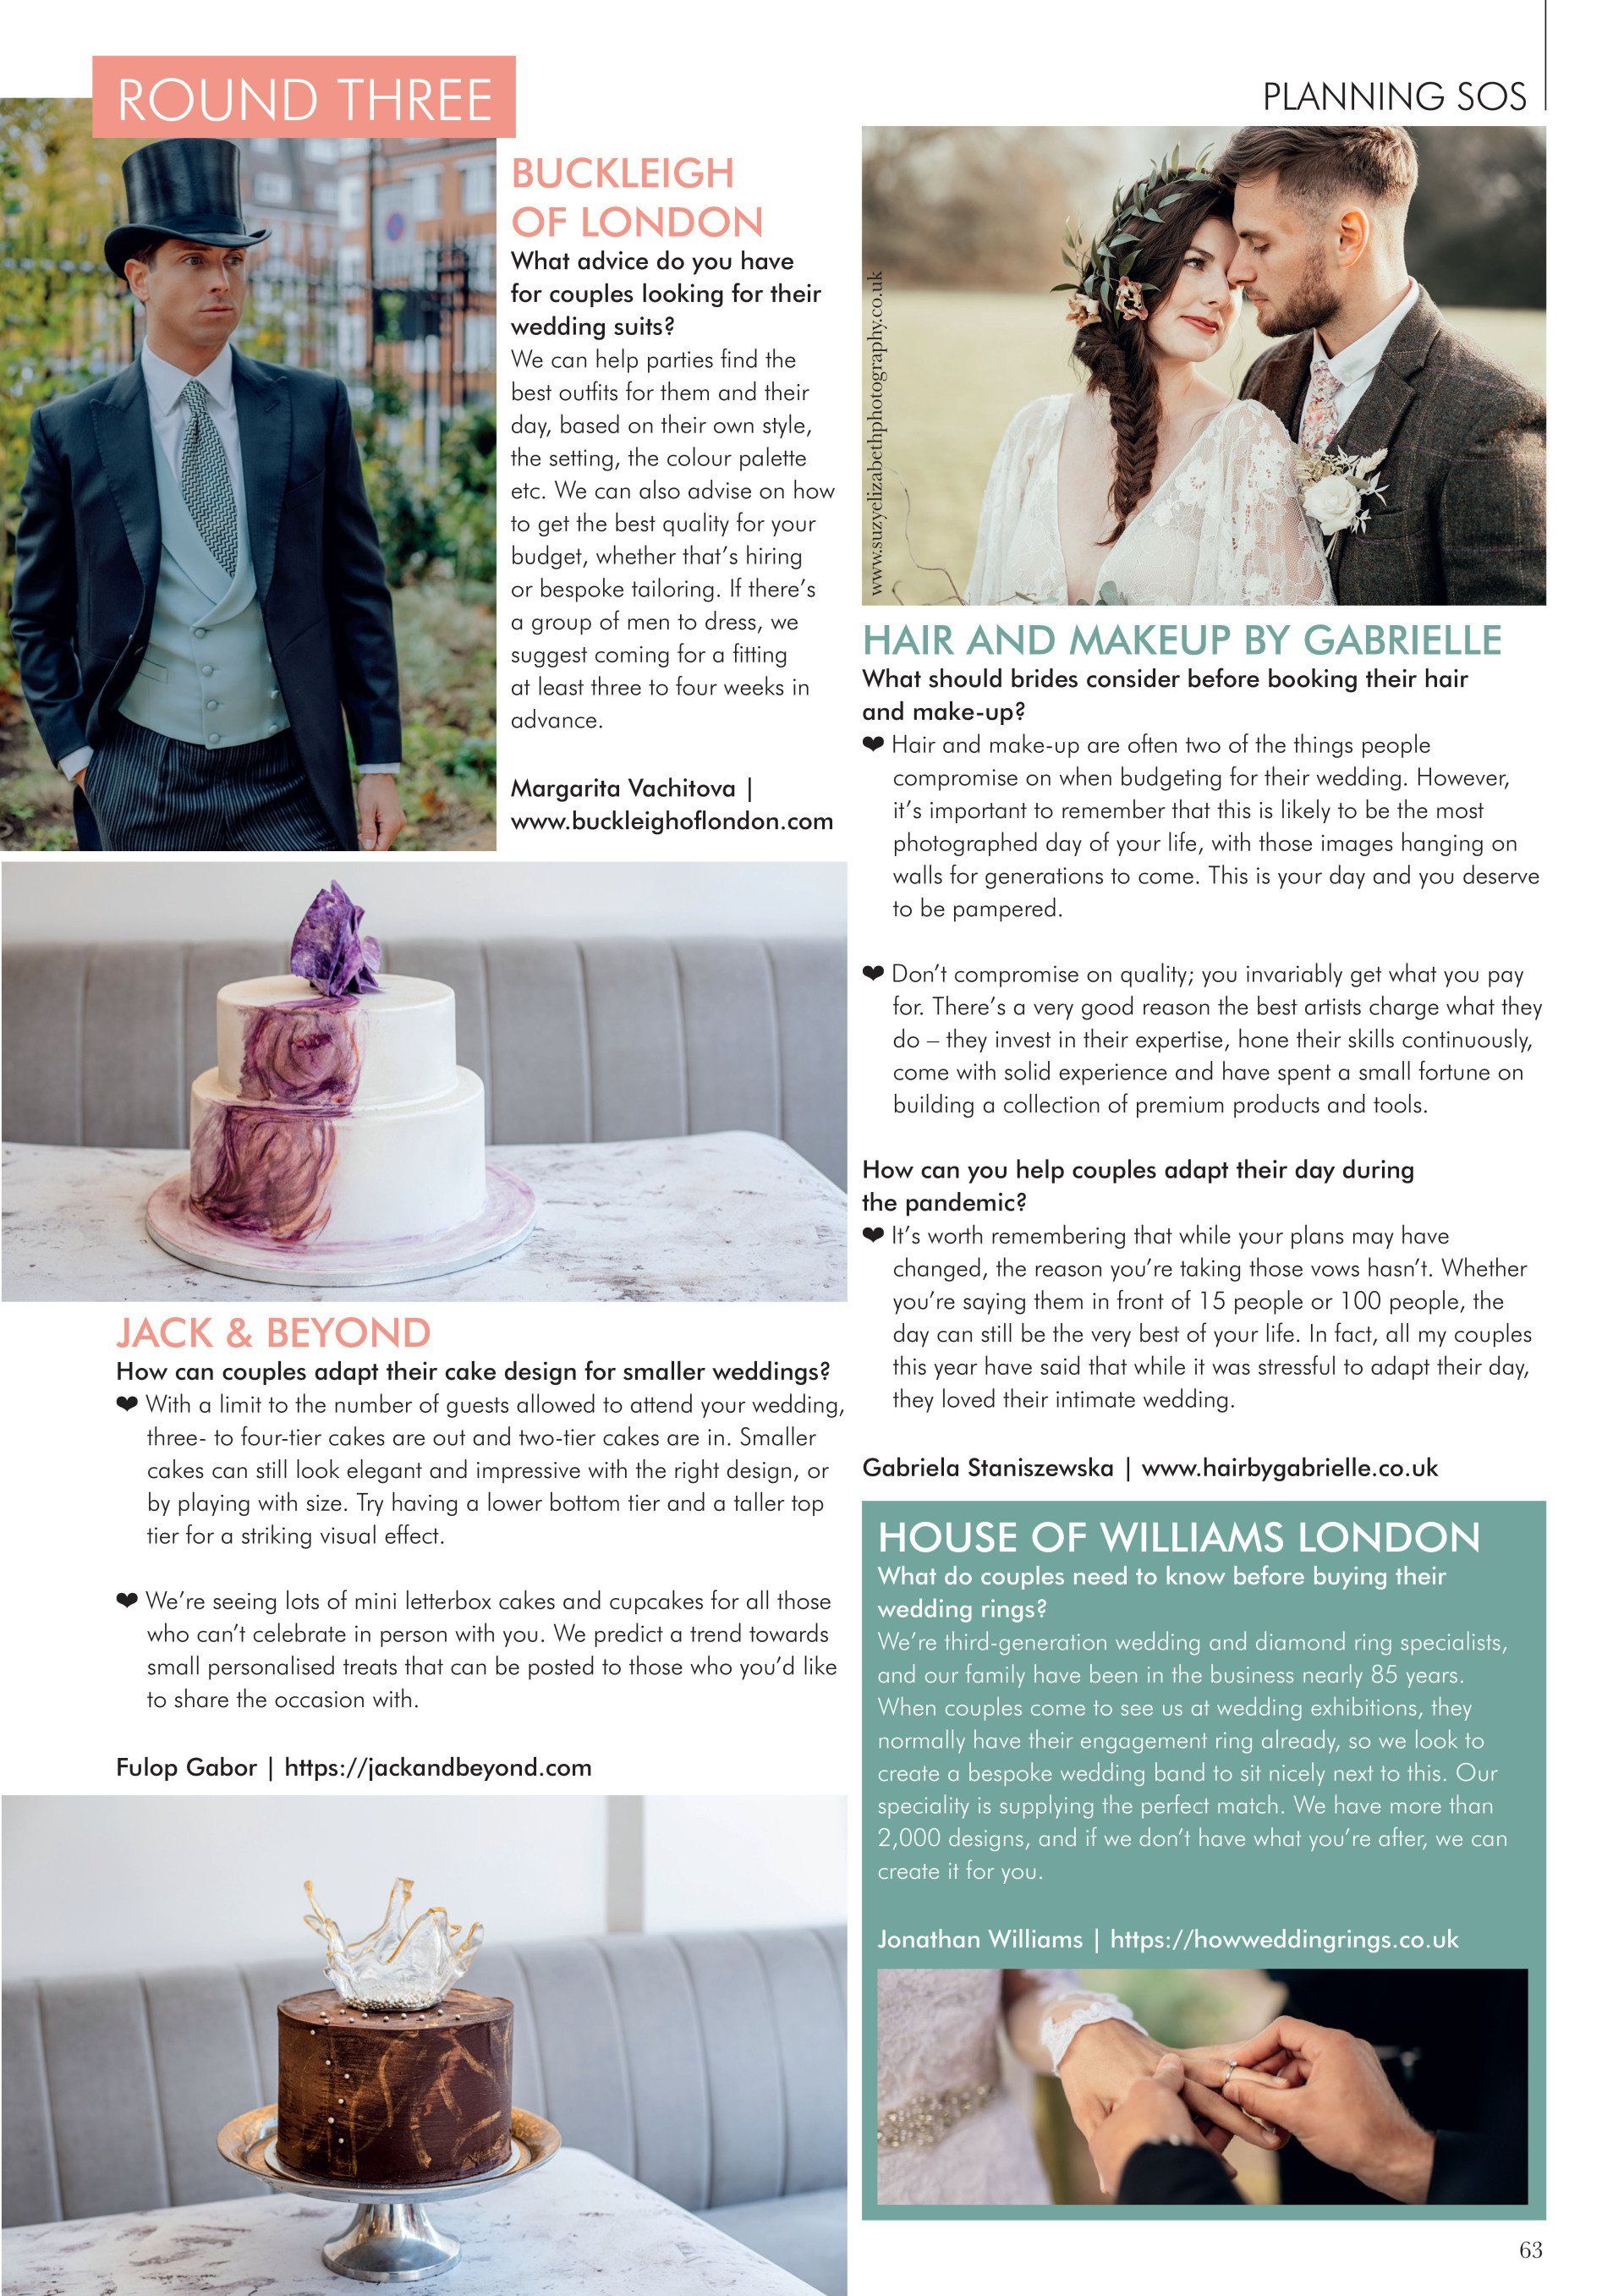 Your London Wedding magazine feature Planning SOS